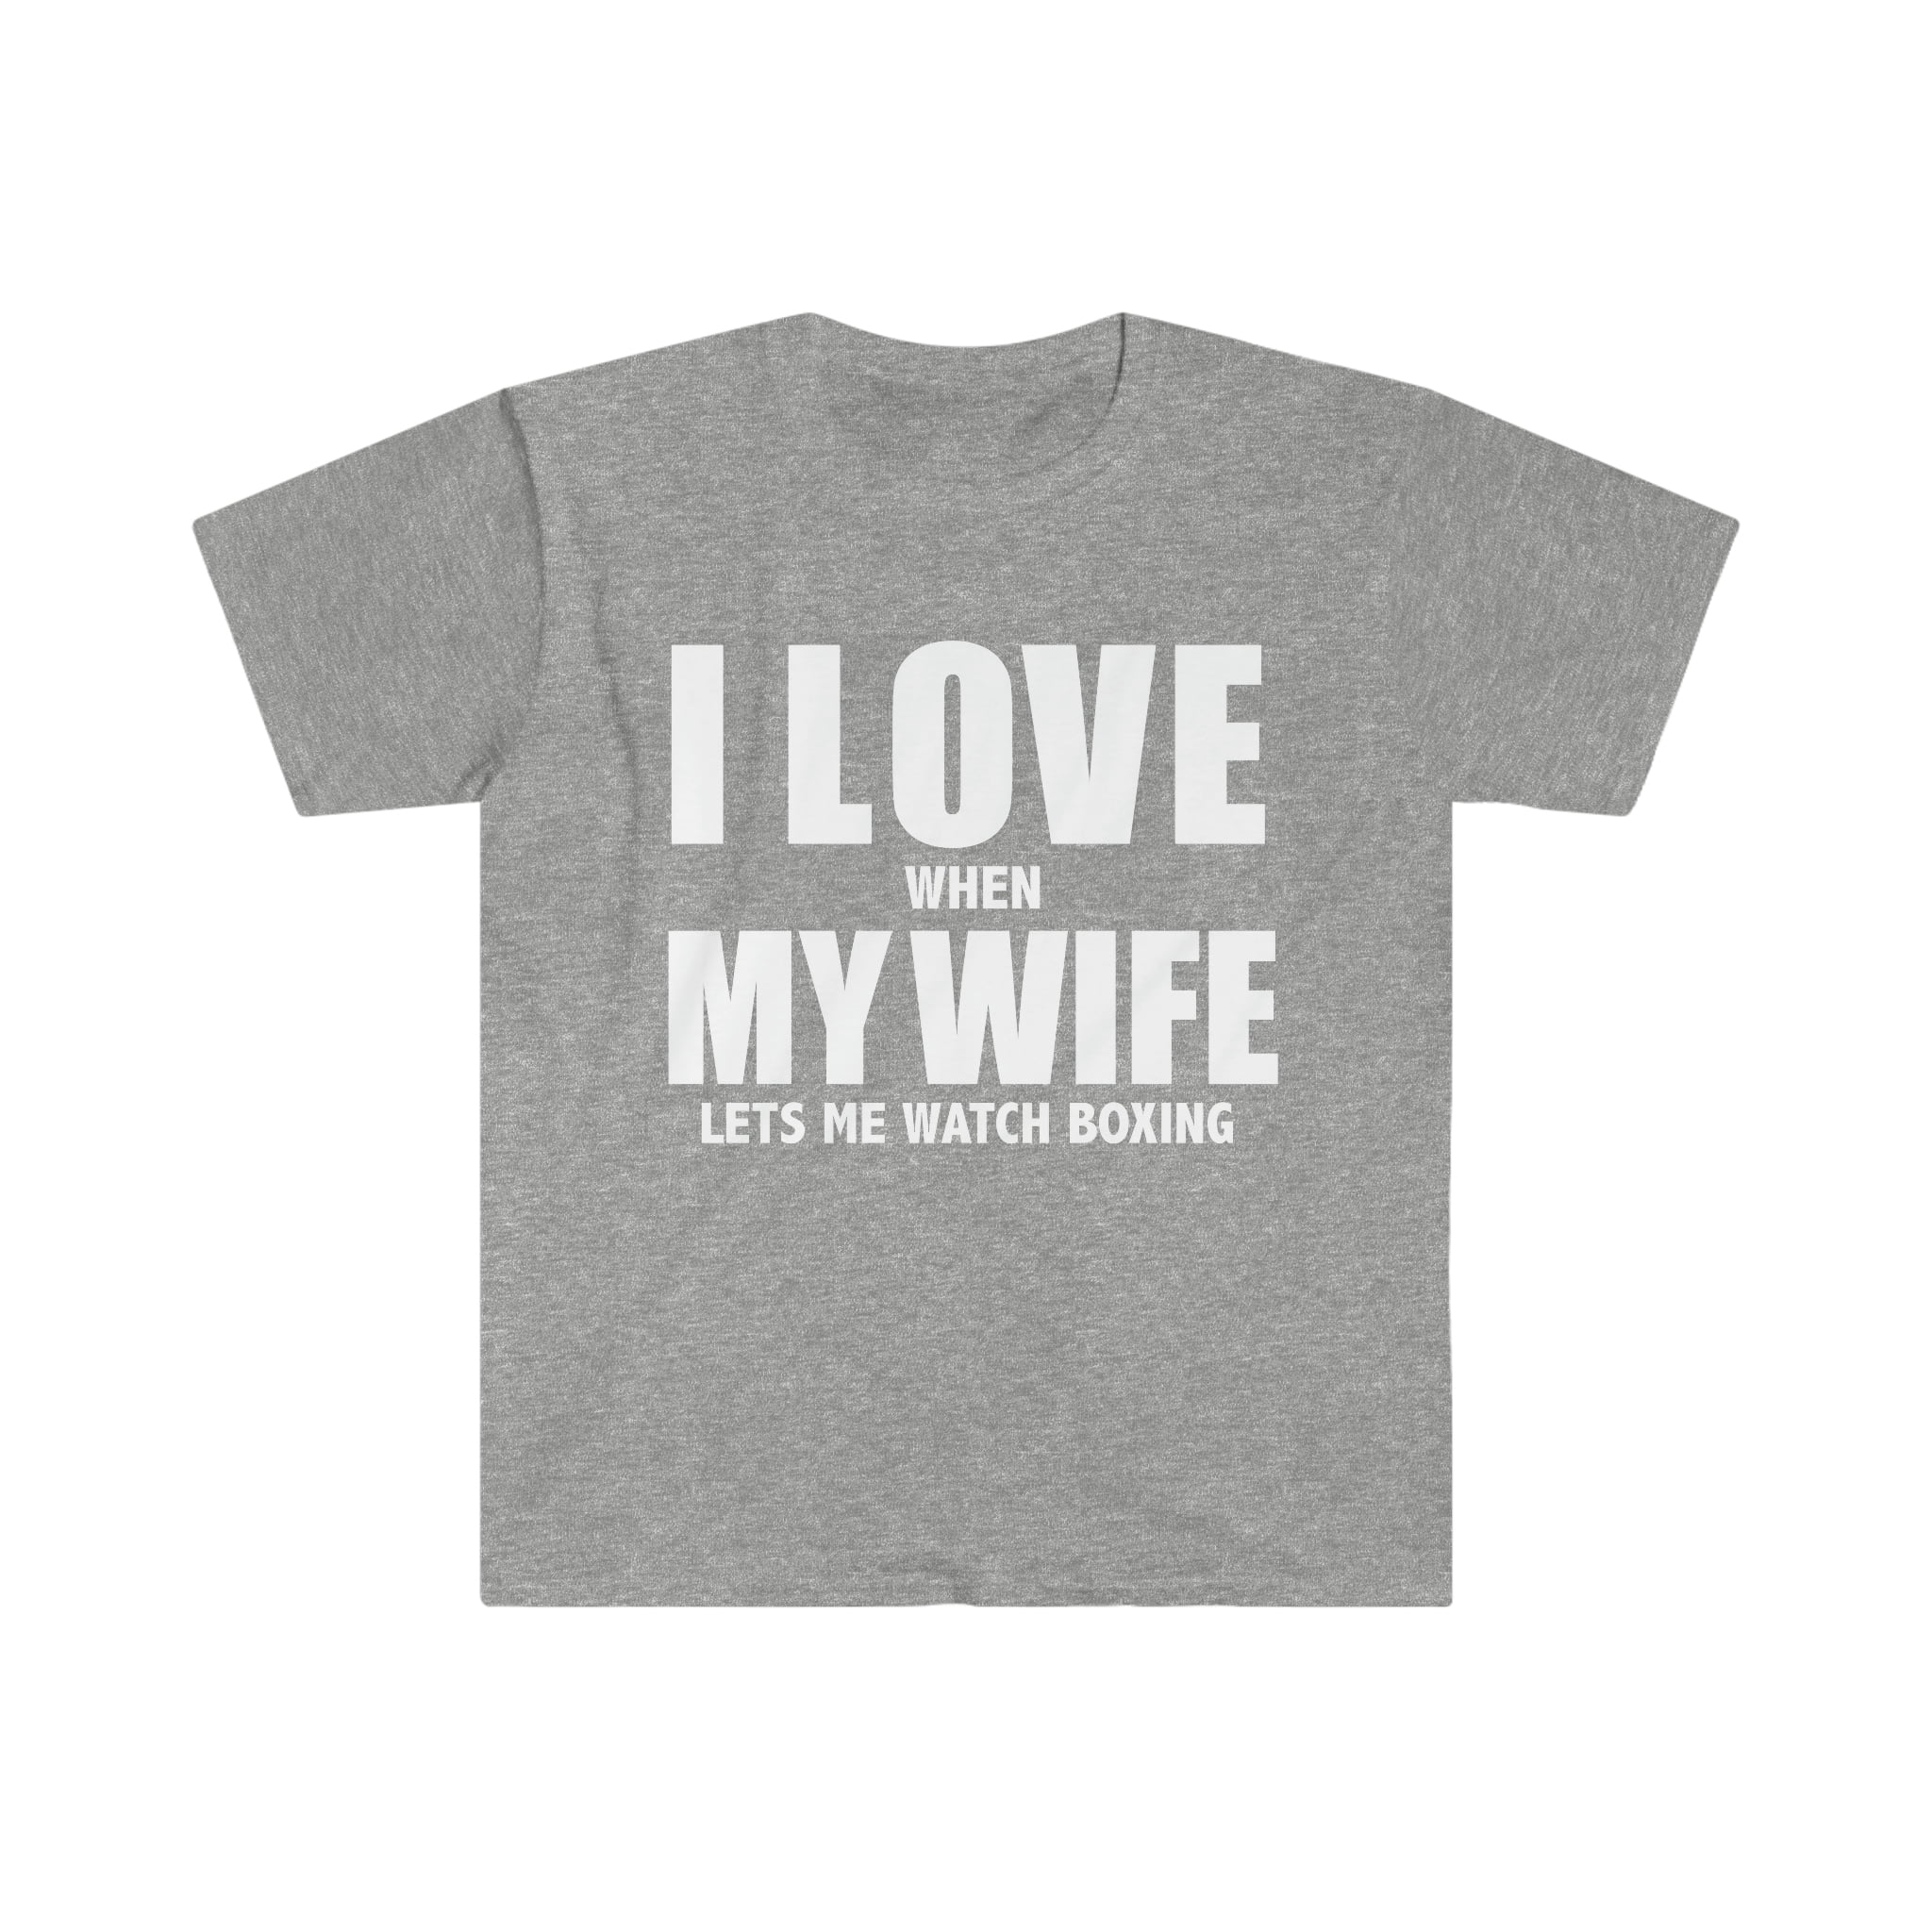 Love my wife she lets me watch boxing whipped husband Unisex T-shirt S-3XL 